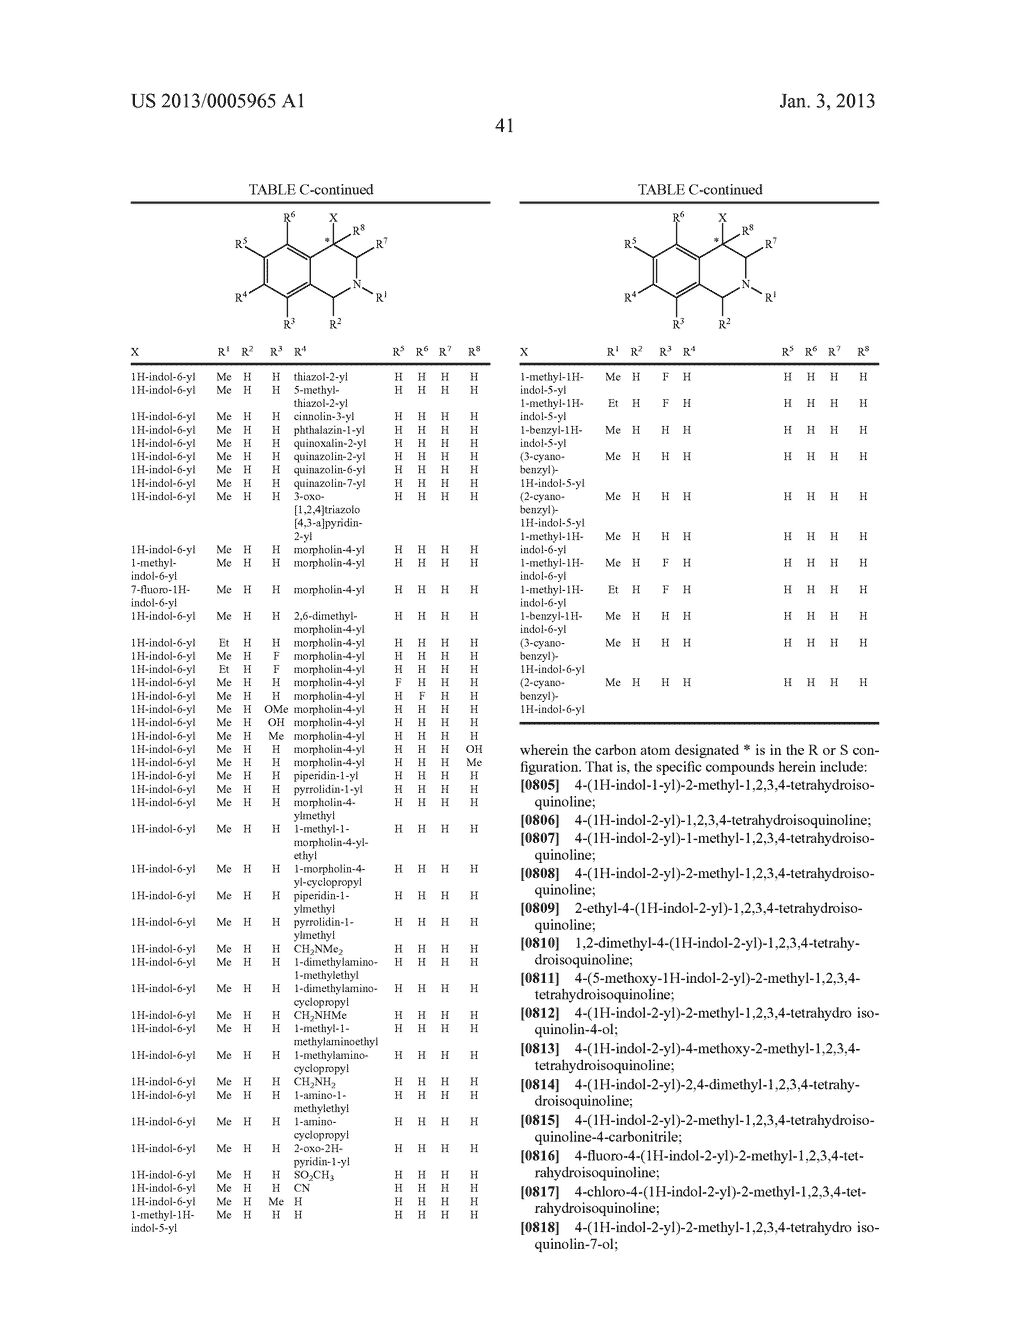 ARYL- AND HETEROARYL-SUBSTITUTED TETRAHYDROISOQUINOLINES AND USE THEREOF     TO BLOCK REUPTAKE OF NOREPINEPHRINE, DOPAMINE, AND SEROTONIN - diagram, schematic, and image 42